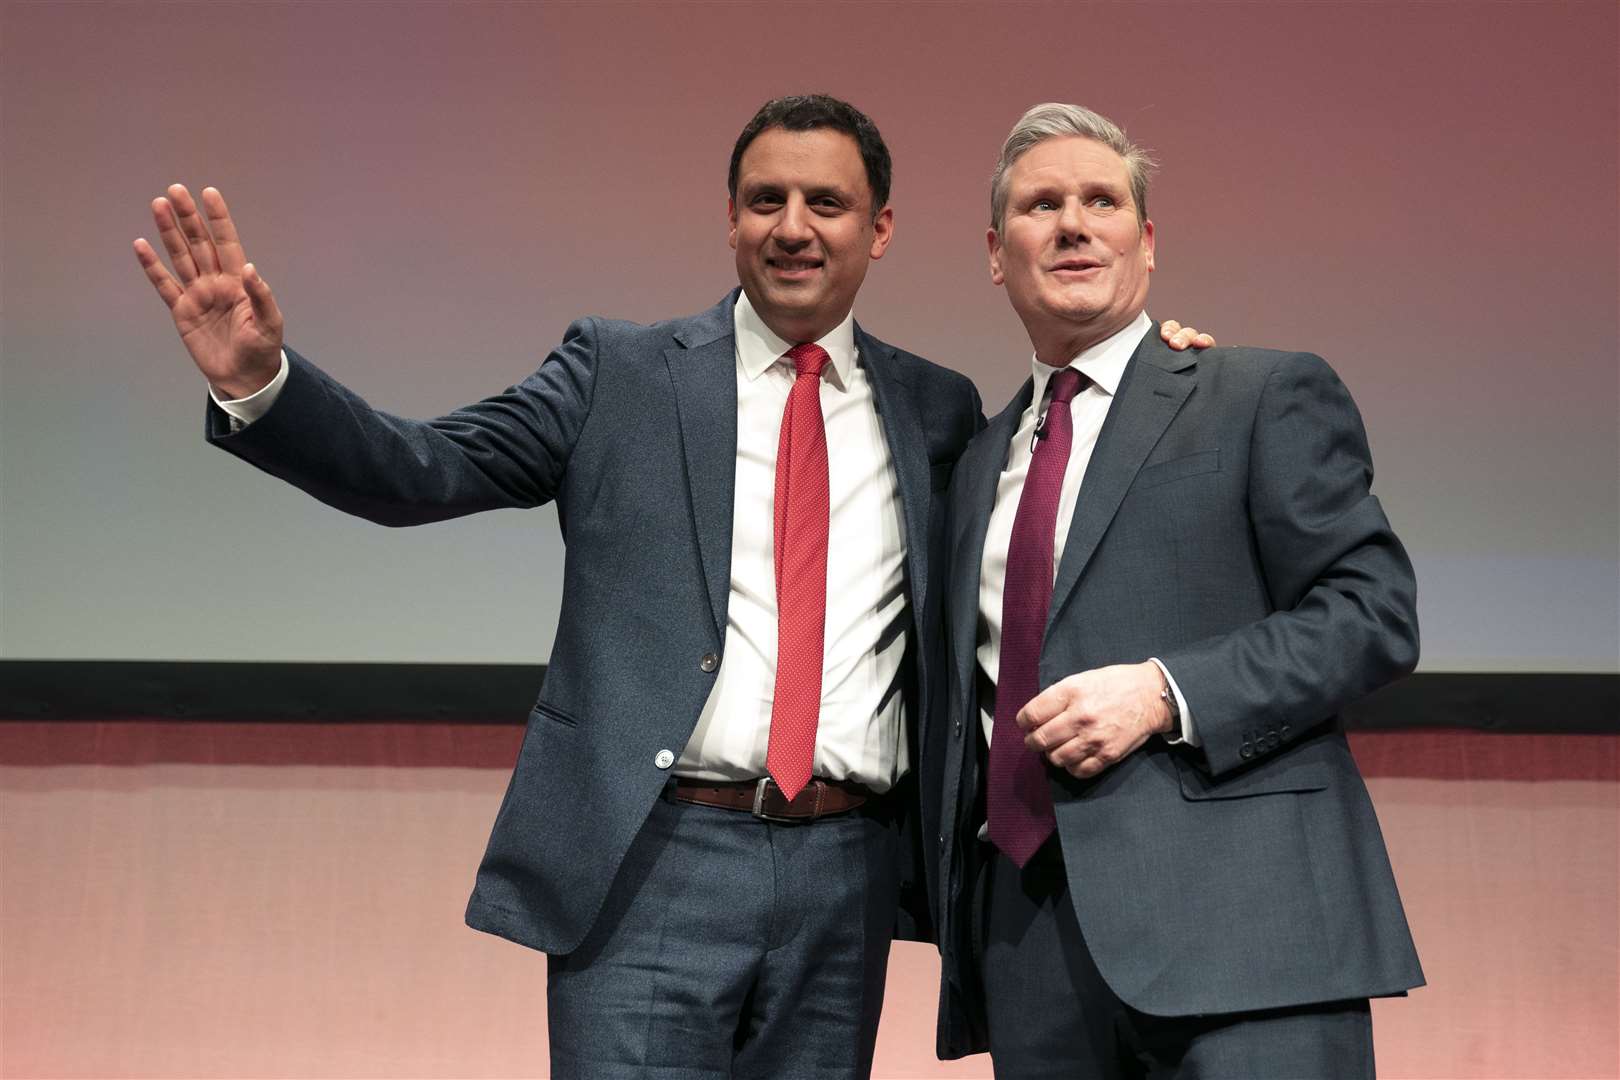 Labour leader Sir Keir Starmer will join Anas Sarwar to launch the Scottish campaign (Jane Barlow/PA)